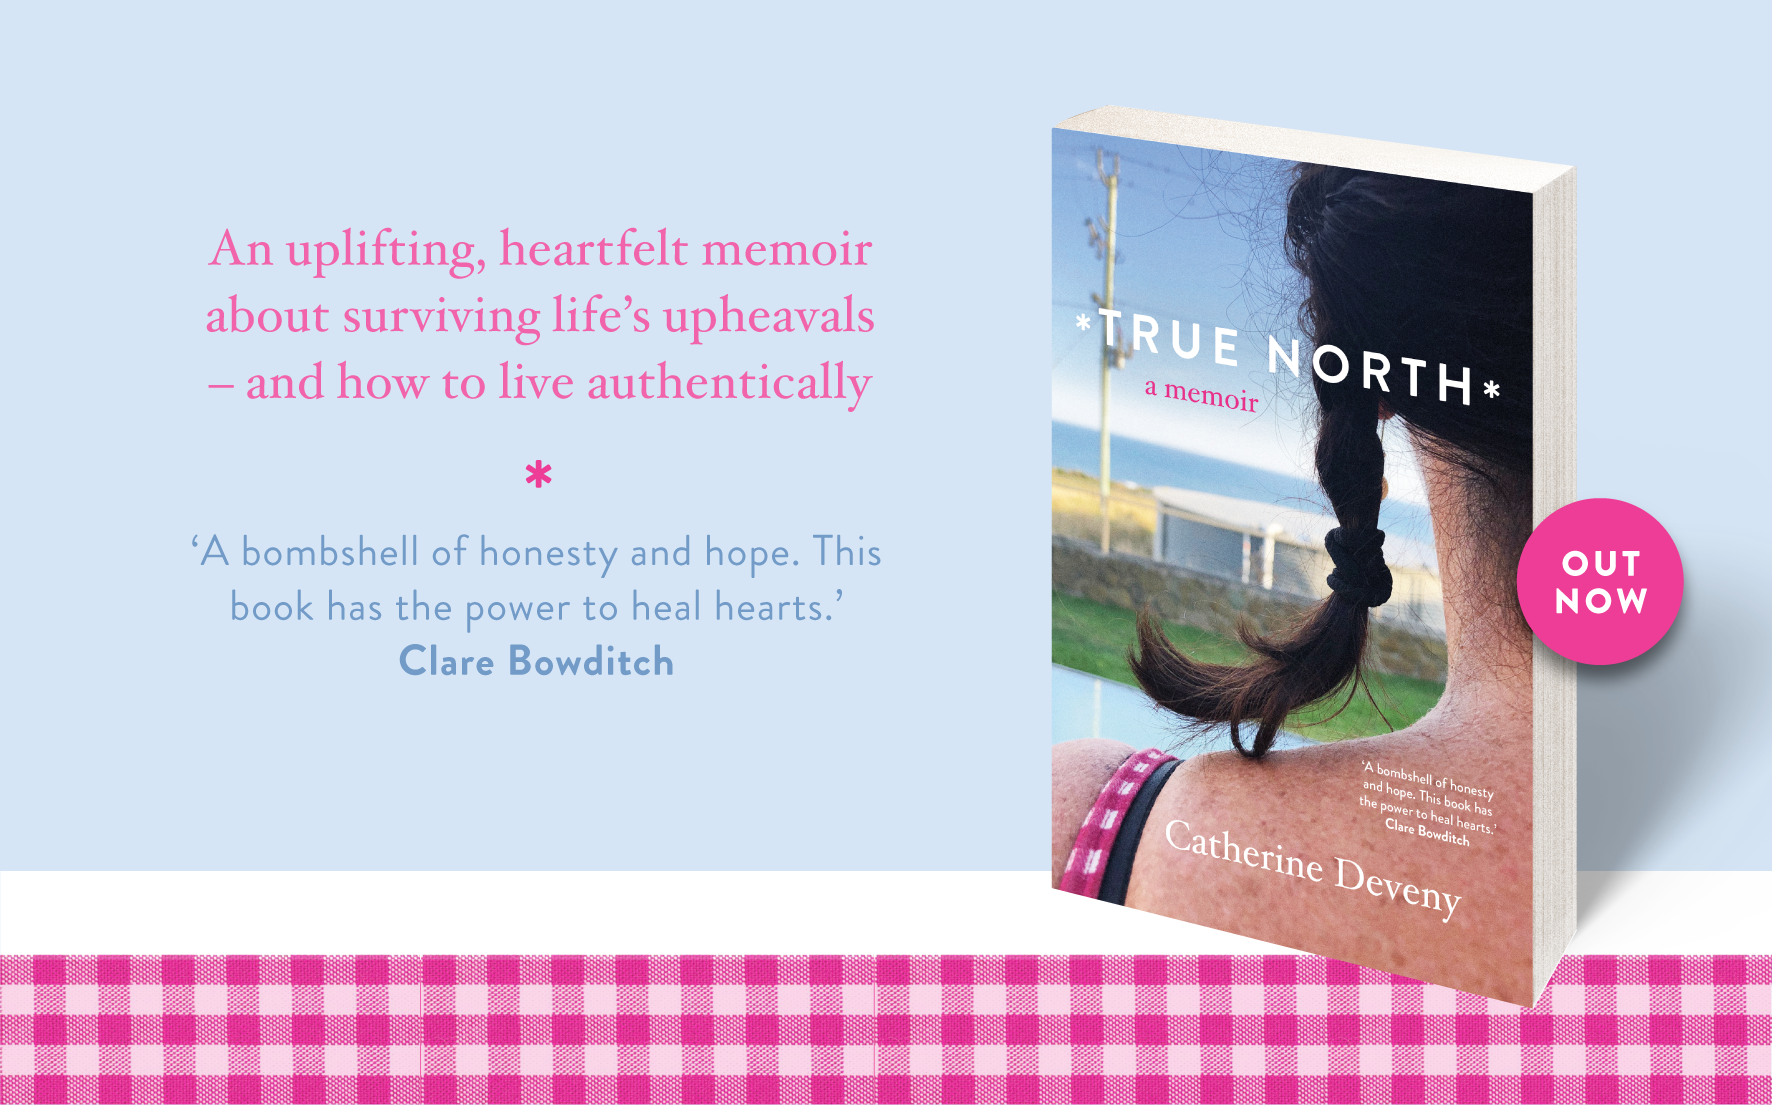 True North by Catherine Deveny is out now